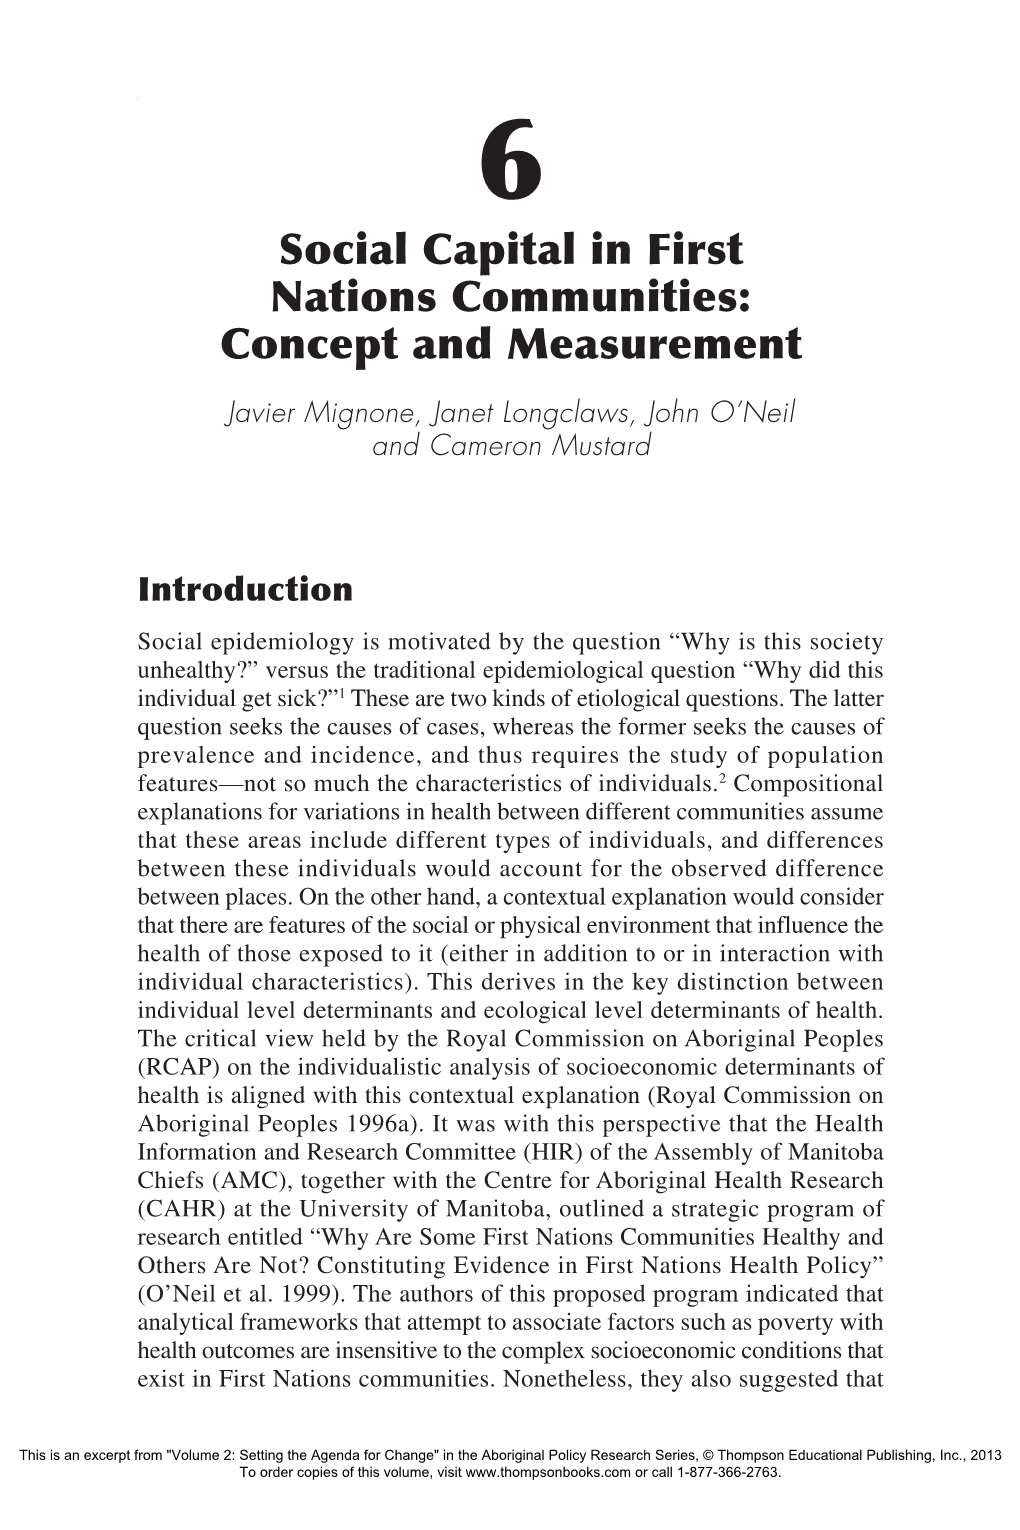 Social Capital in First Nations Communities / 125 6 Social Capital in First Nations Communities: Concept and Measurement